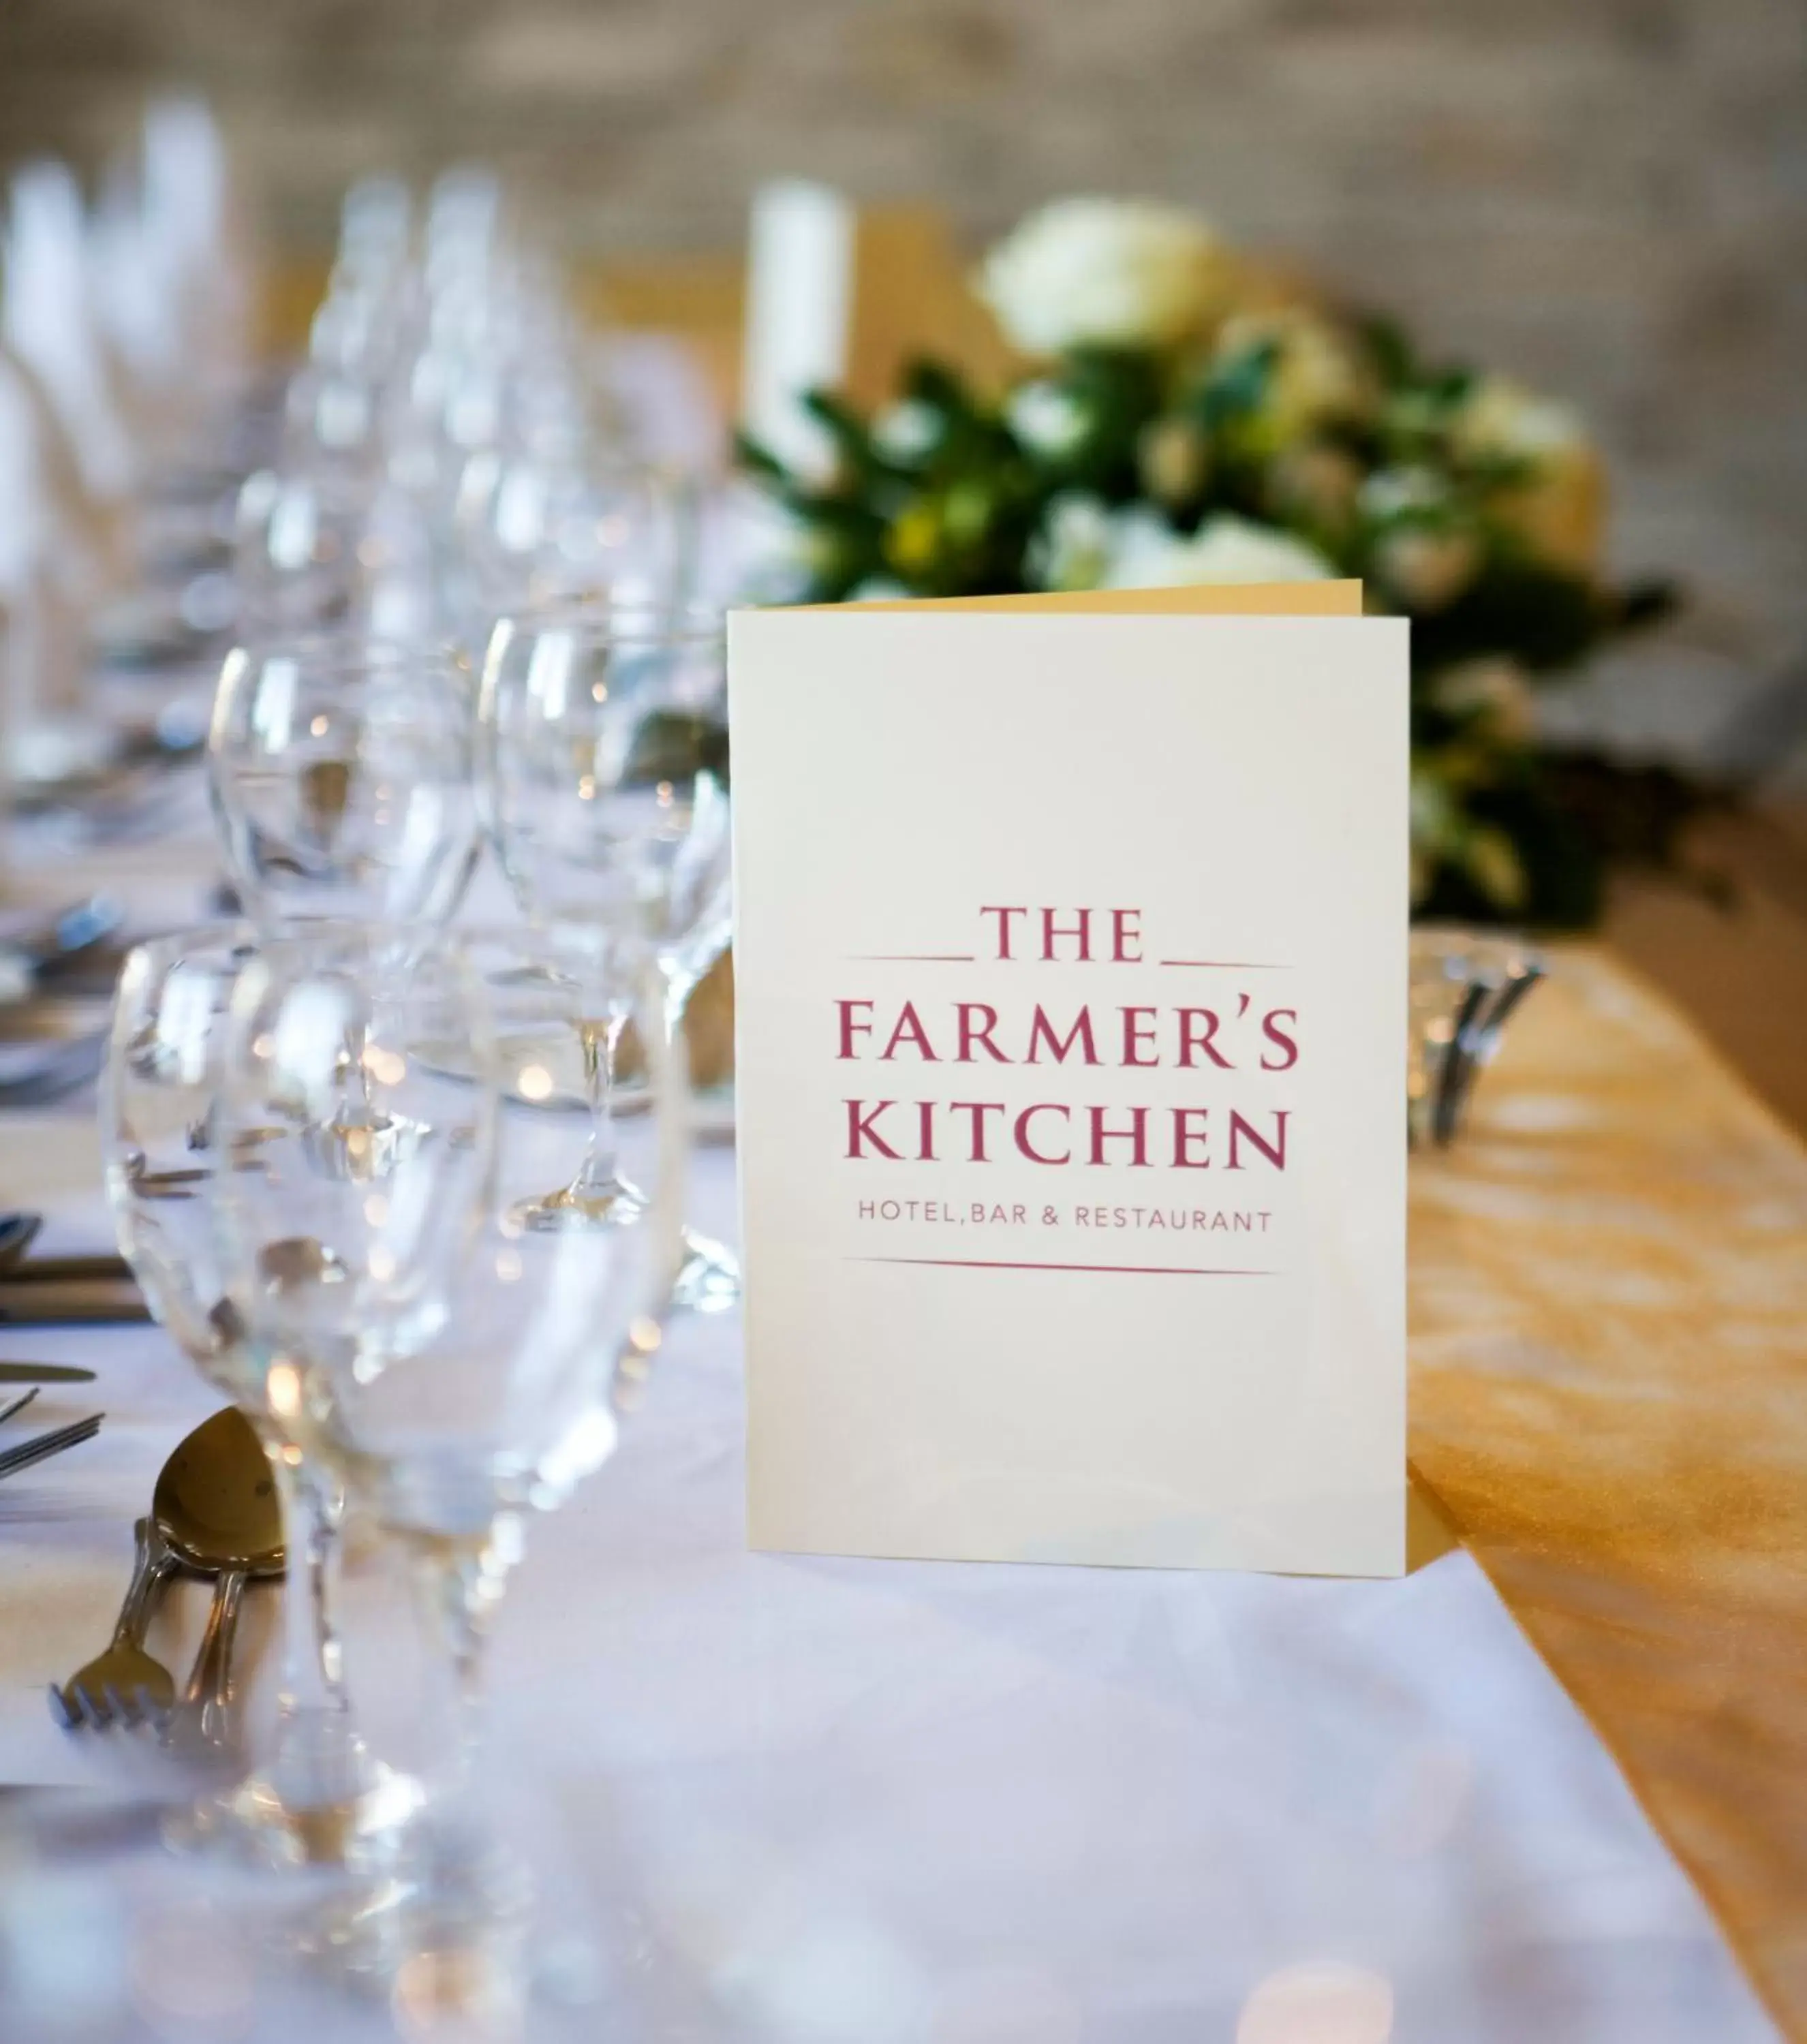 Banquet/Function facilities in The Farmers Kitchen Hotel